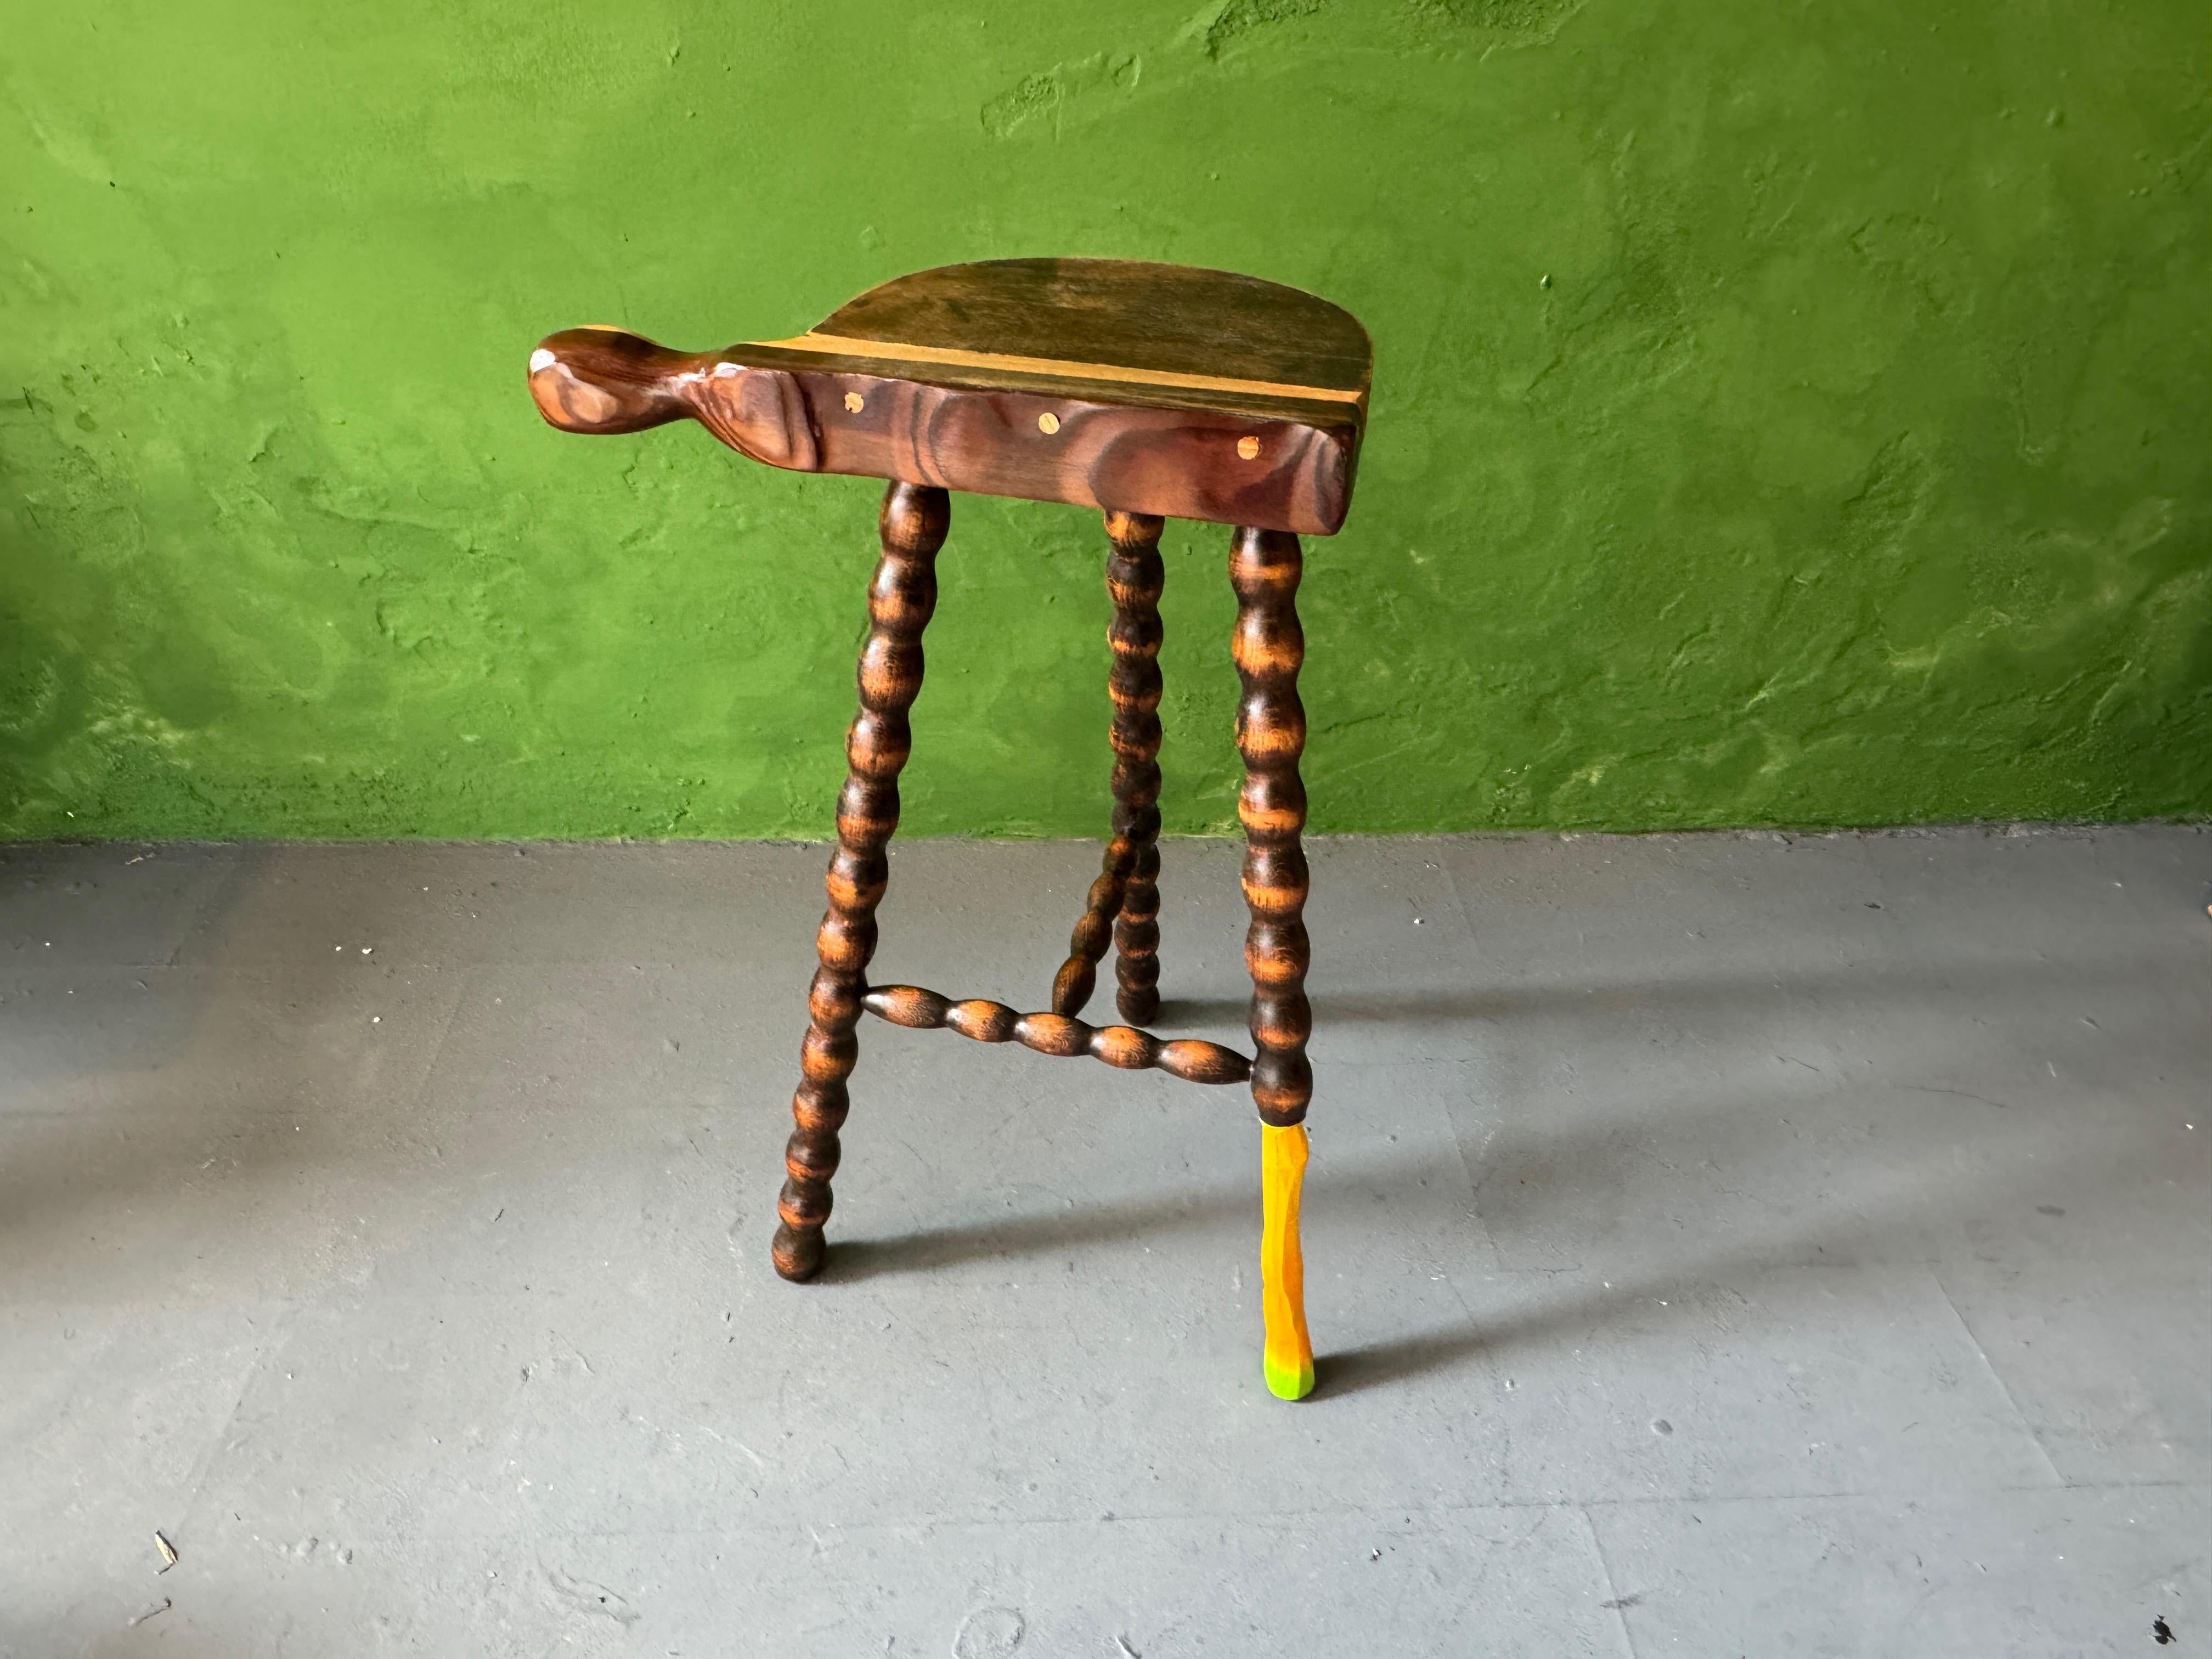 French Barstool contemporized. Painted, extra alder wood piece added and carved, lacquered with violine varnish.


•	Info about Markus F. Staab
•	born 1964 in Aschaffenburg, Germany
•	since  1986 active as a visual artist 
•	since  1989 national and